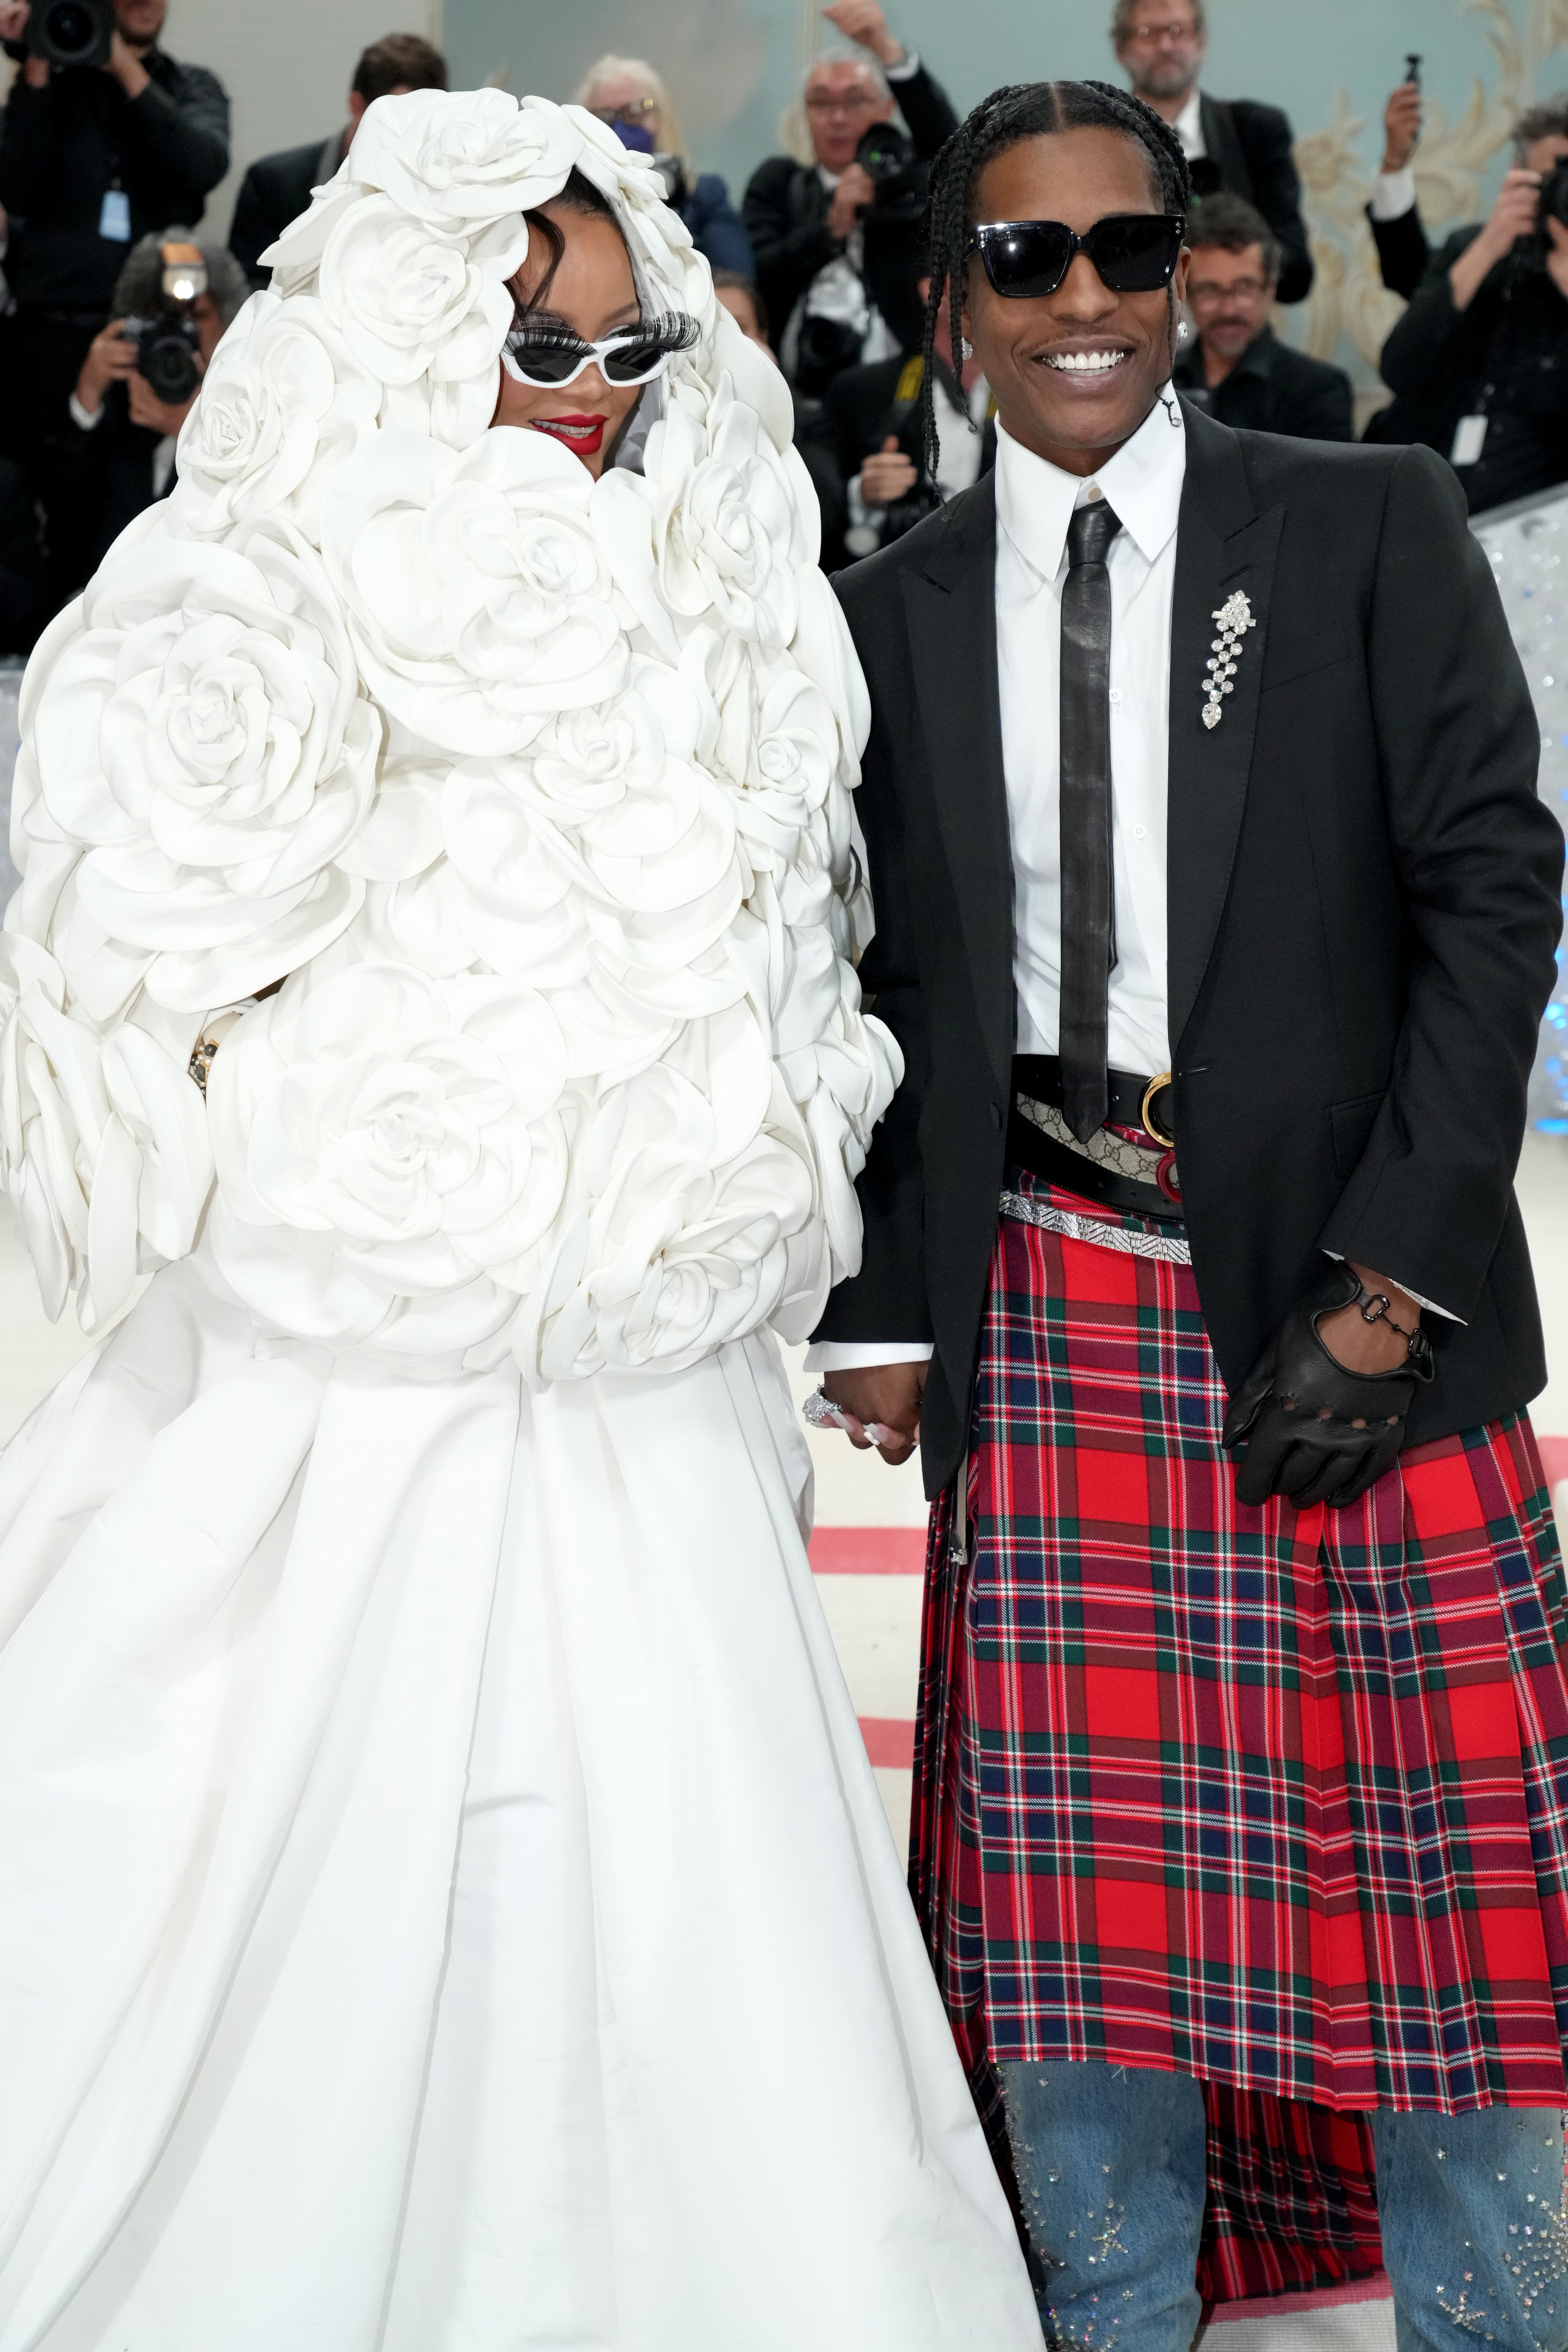 Person in voluminous white floral outfit beside person in tartan kilt and black jacket at event